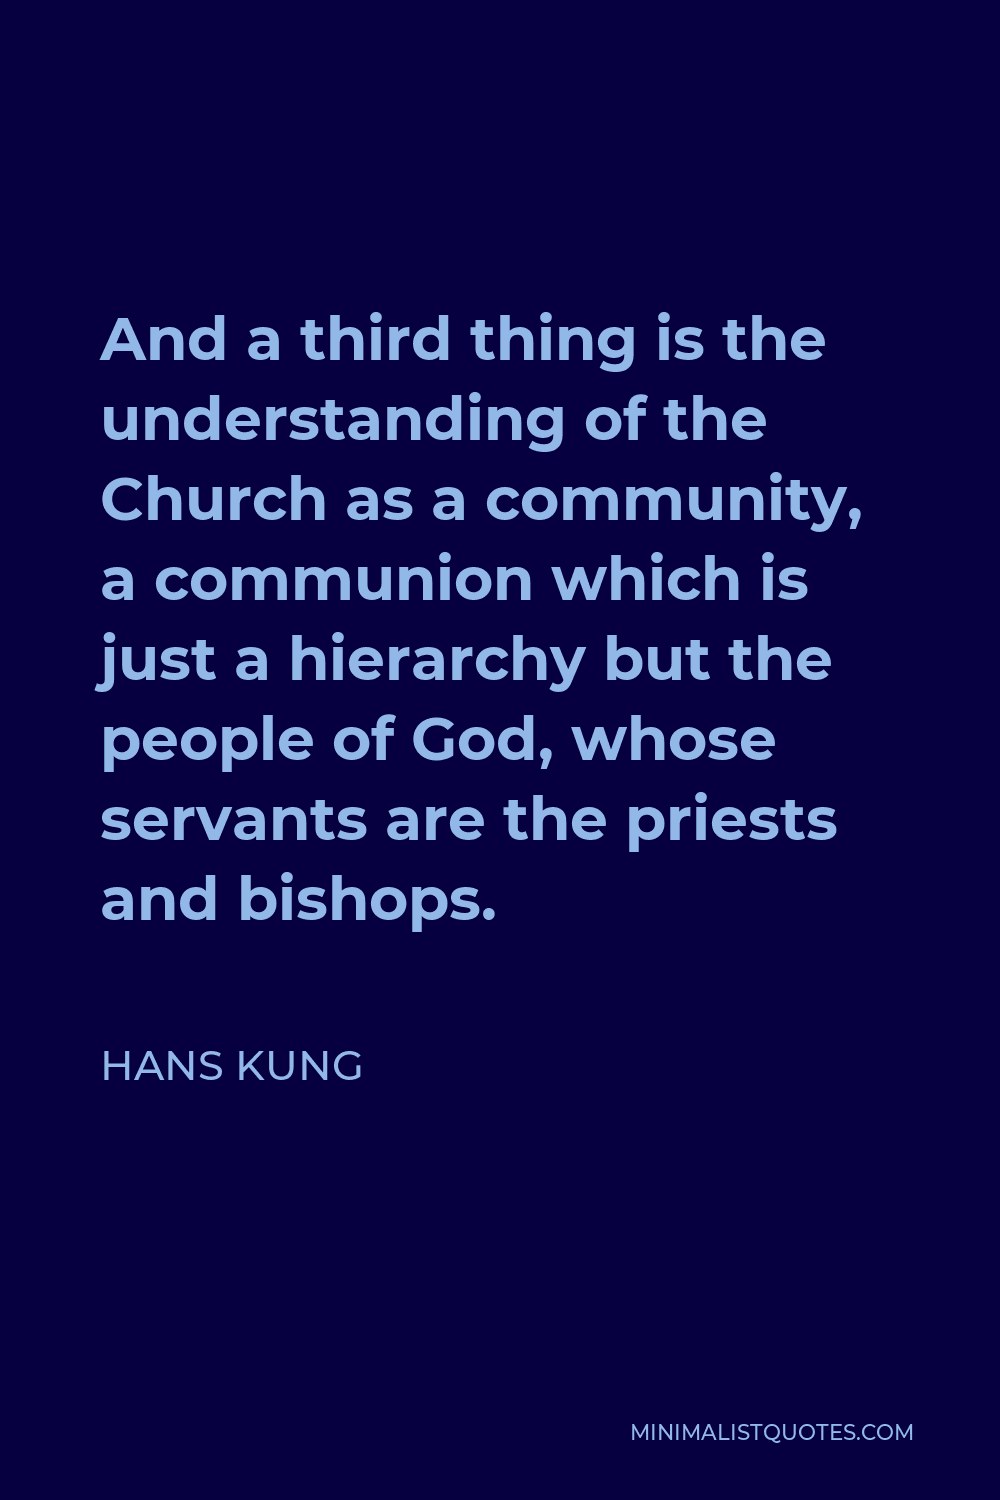 Hans Kung Quote - And a third thing is the understanding of the Church as a community, a communion which is just a hierarchy but the people of God, whose servants are the priests and bishops.